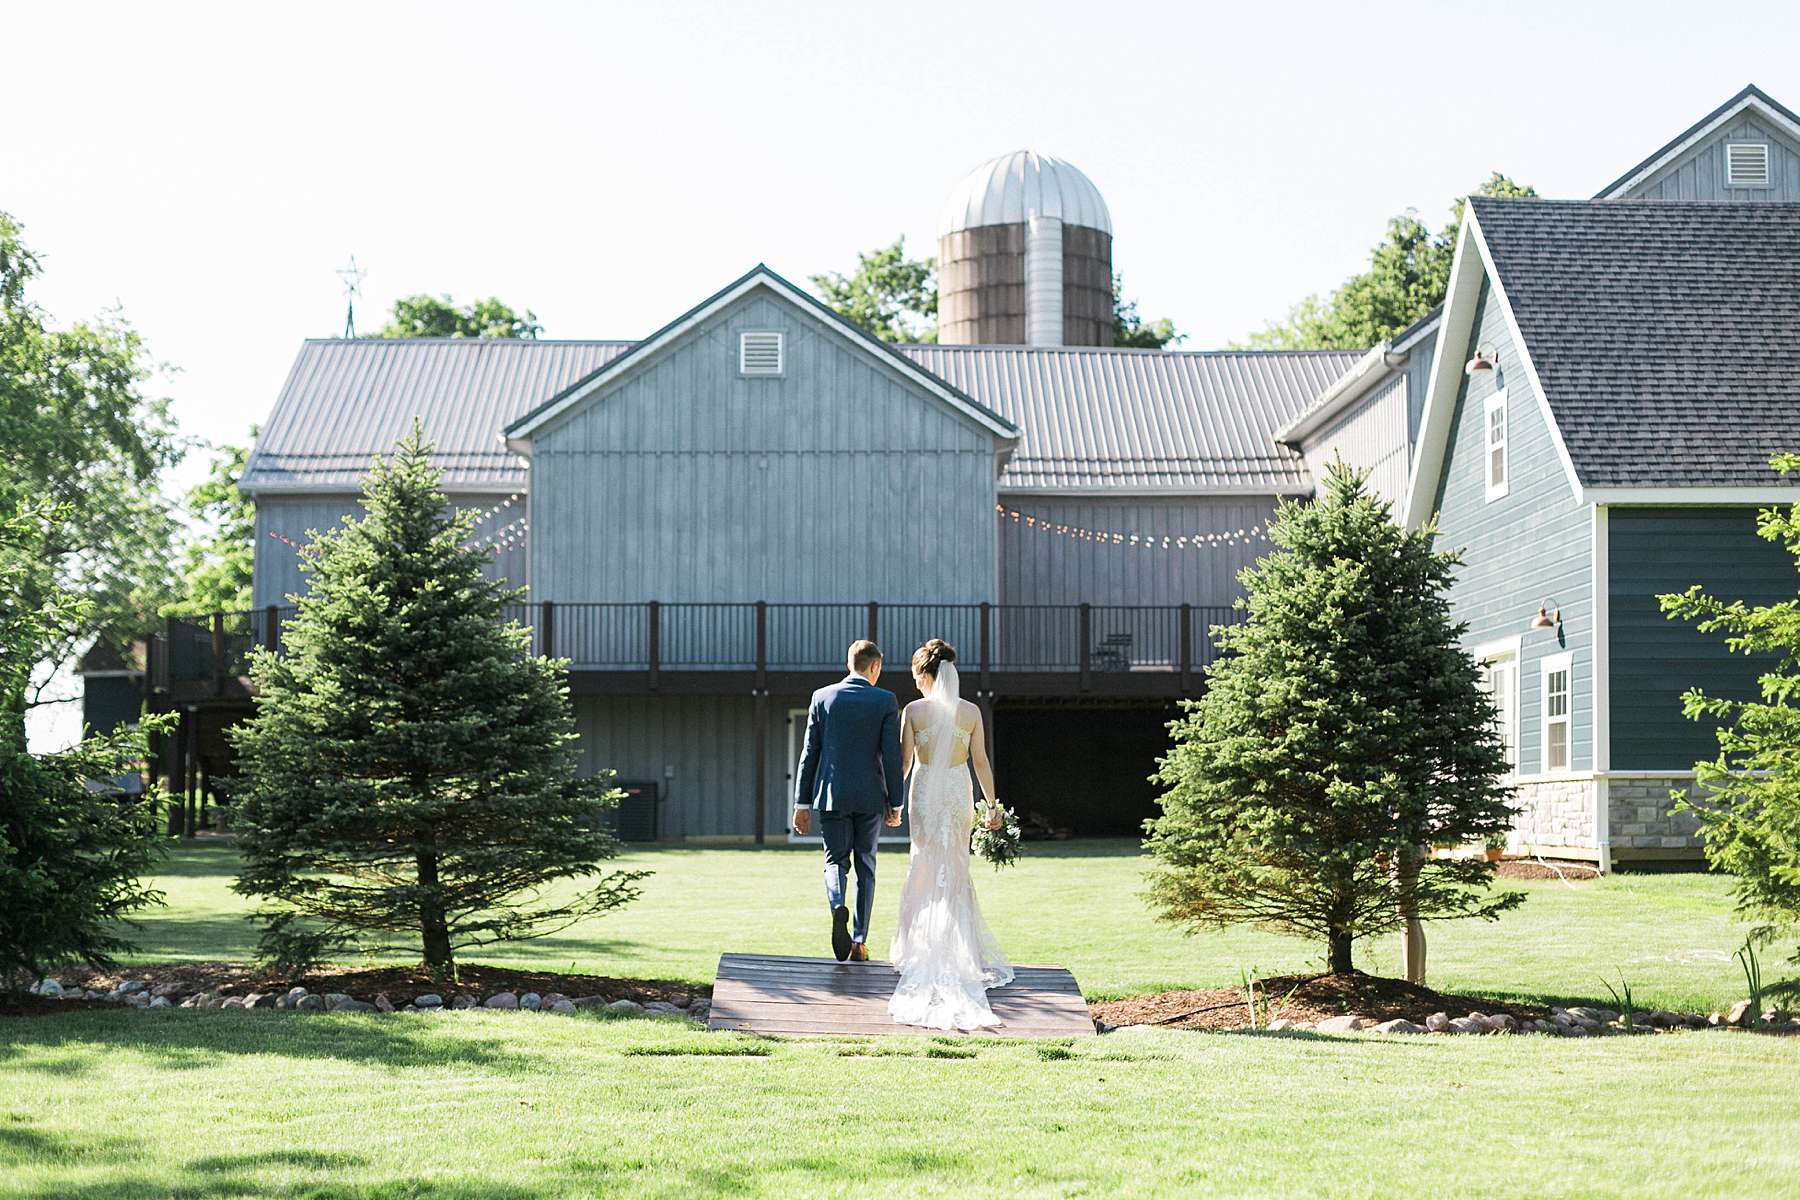 ceremony, rustic romantic wedding at the landing 1841, photo by laurelyn savannah photography